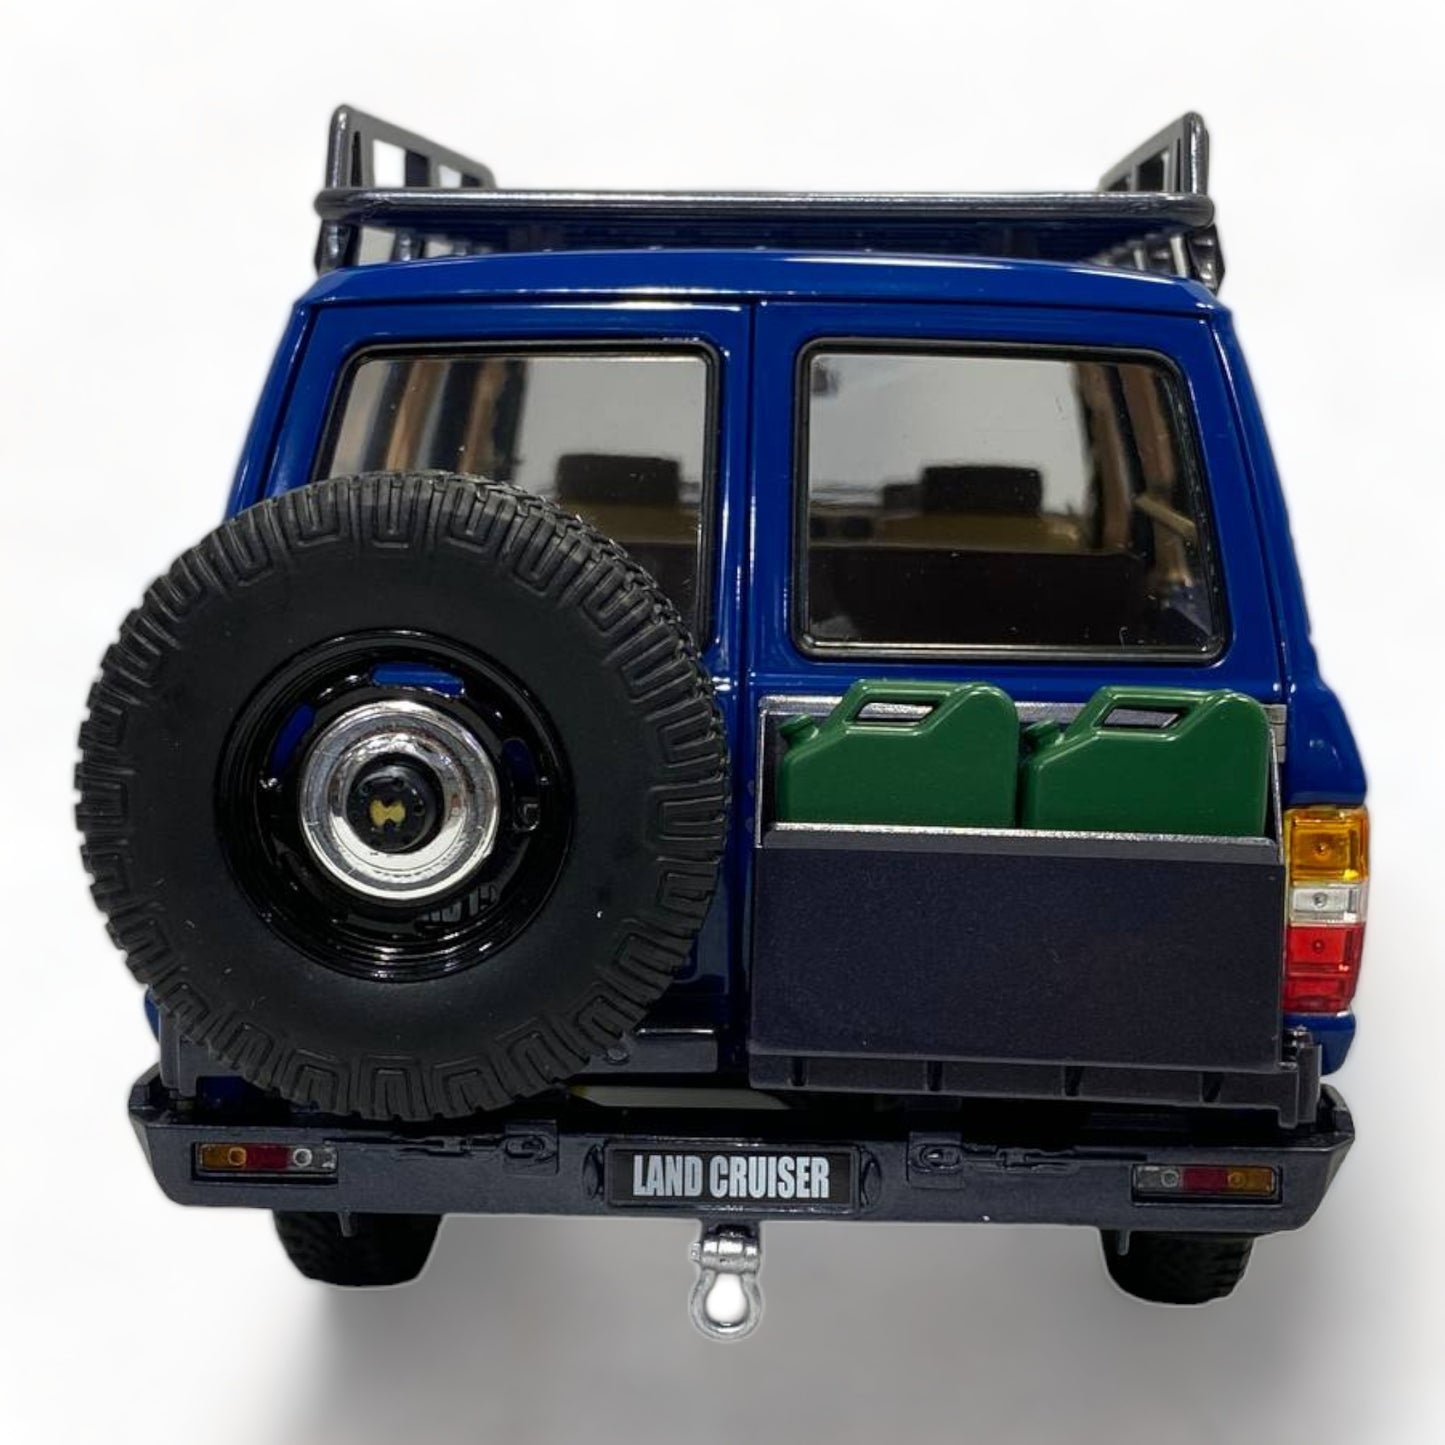 Toyota Land Cruiser 60 (1/18) blue with sticker by Kyosho